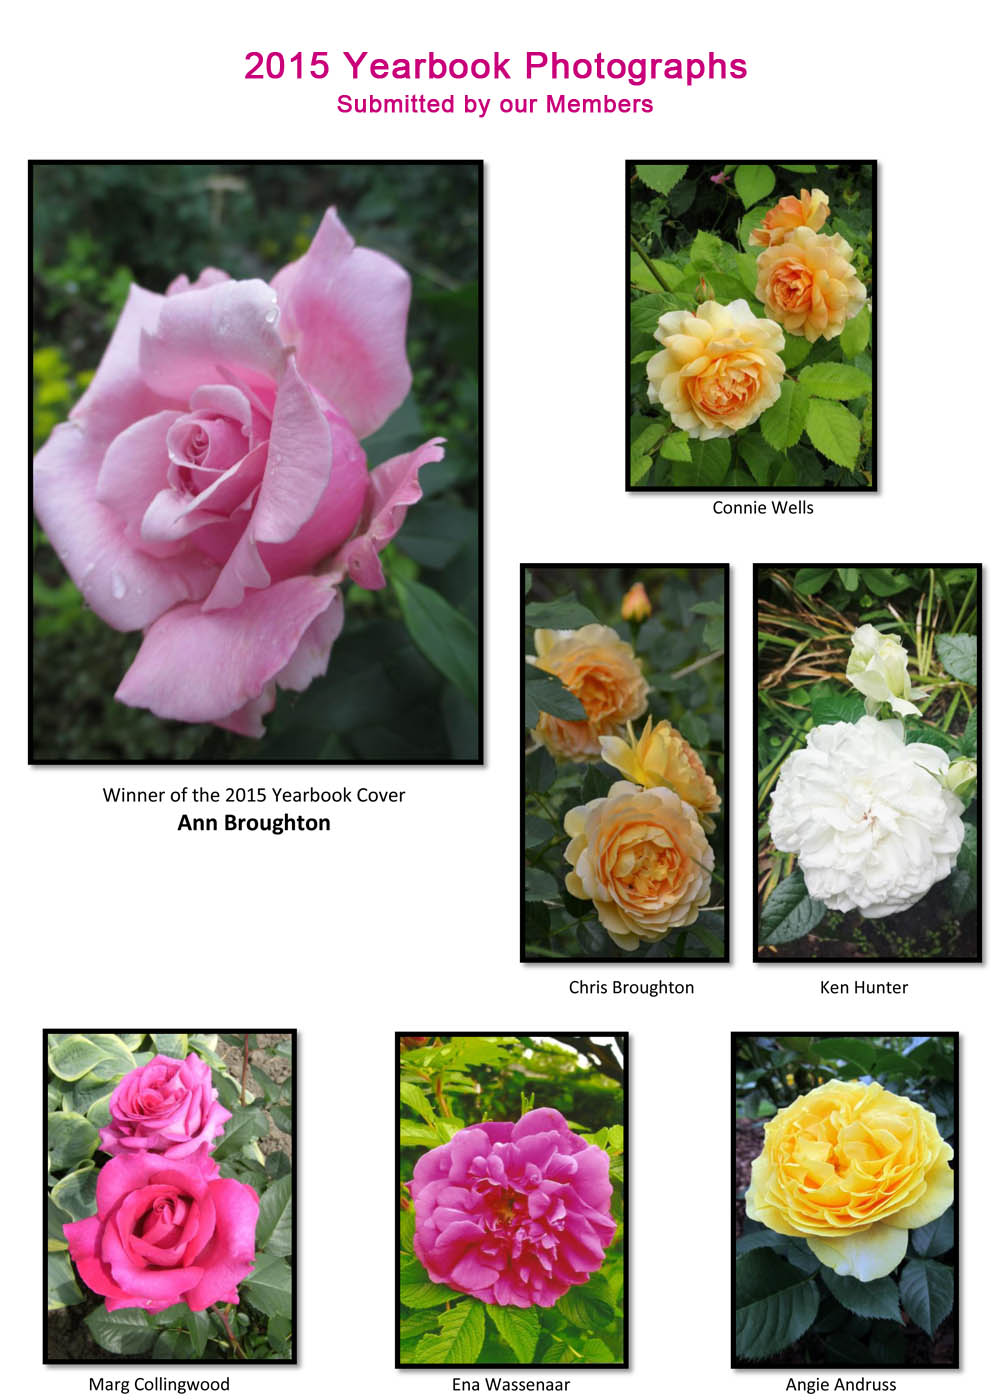 Uxbridge Horticultural Society - 2015 Yearbook Photographs submitted by our members